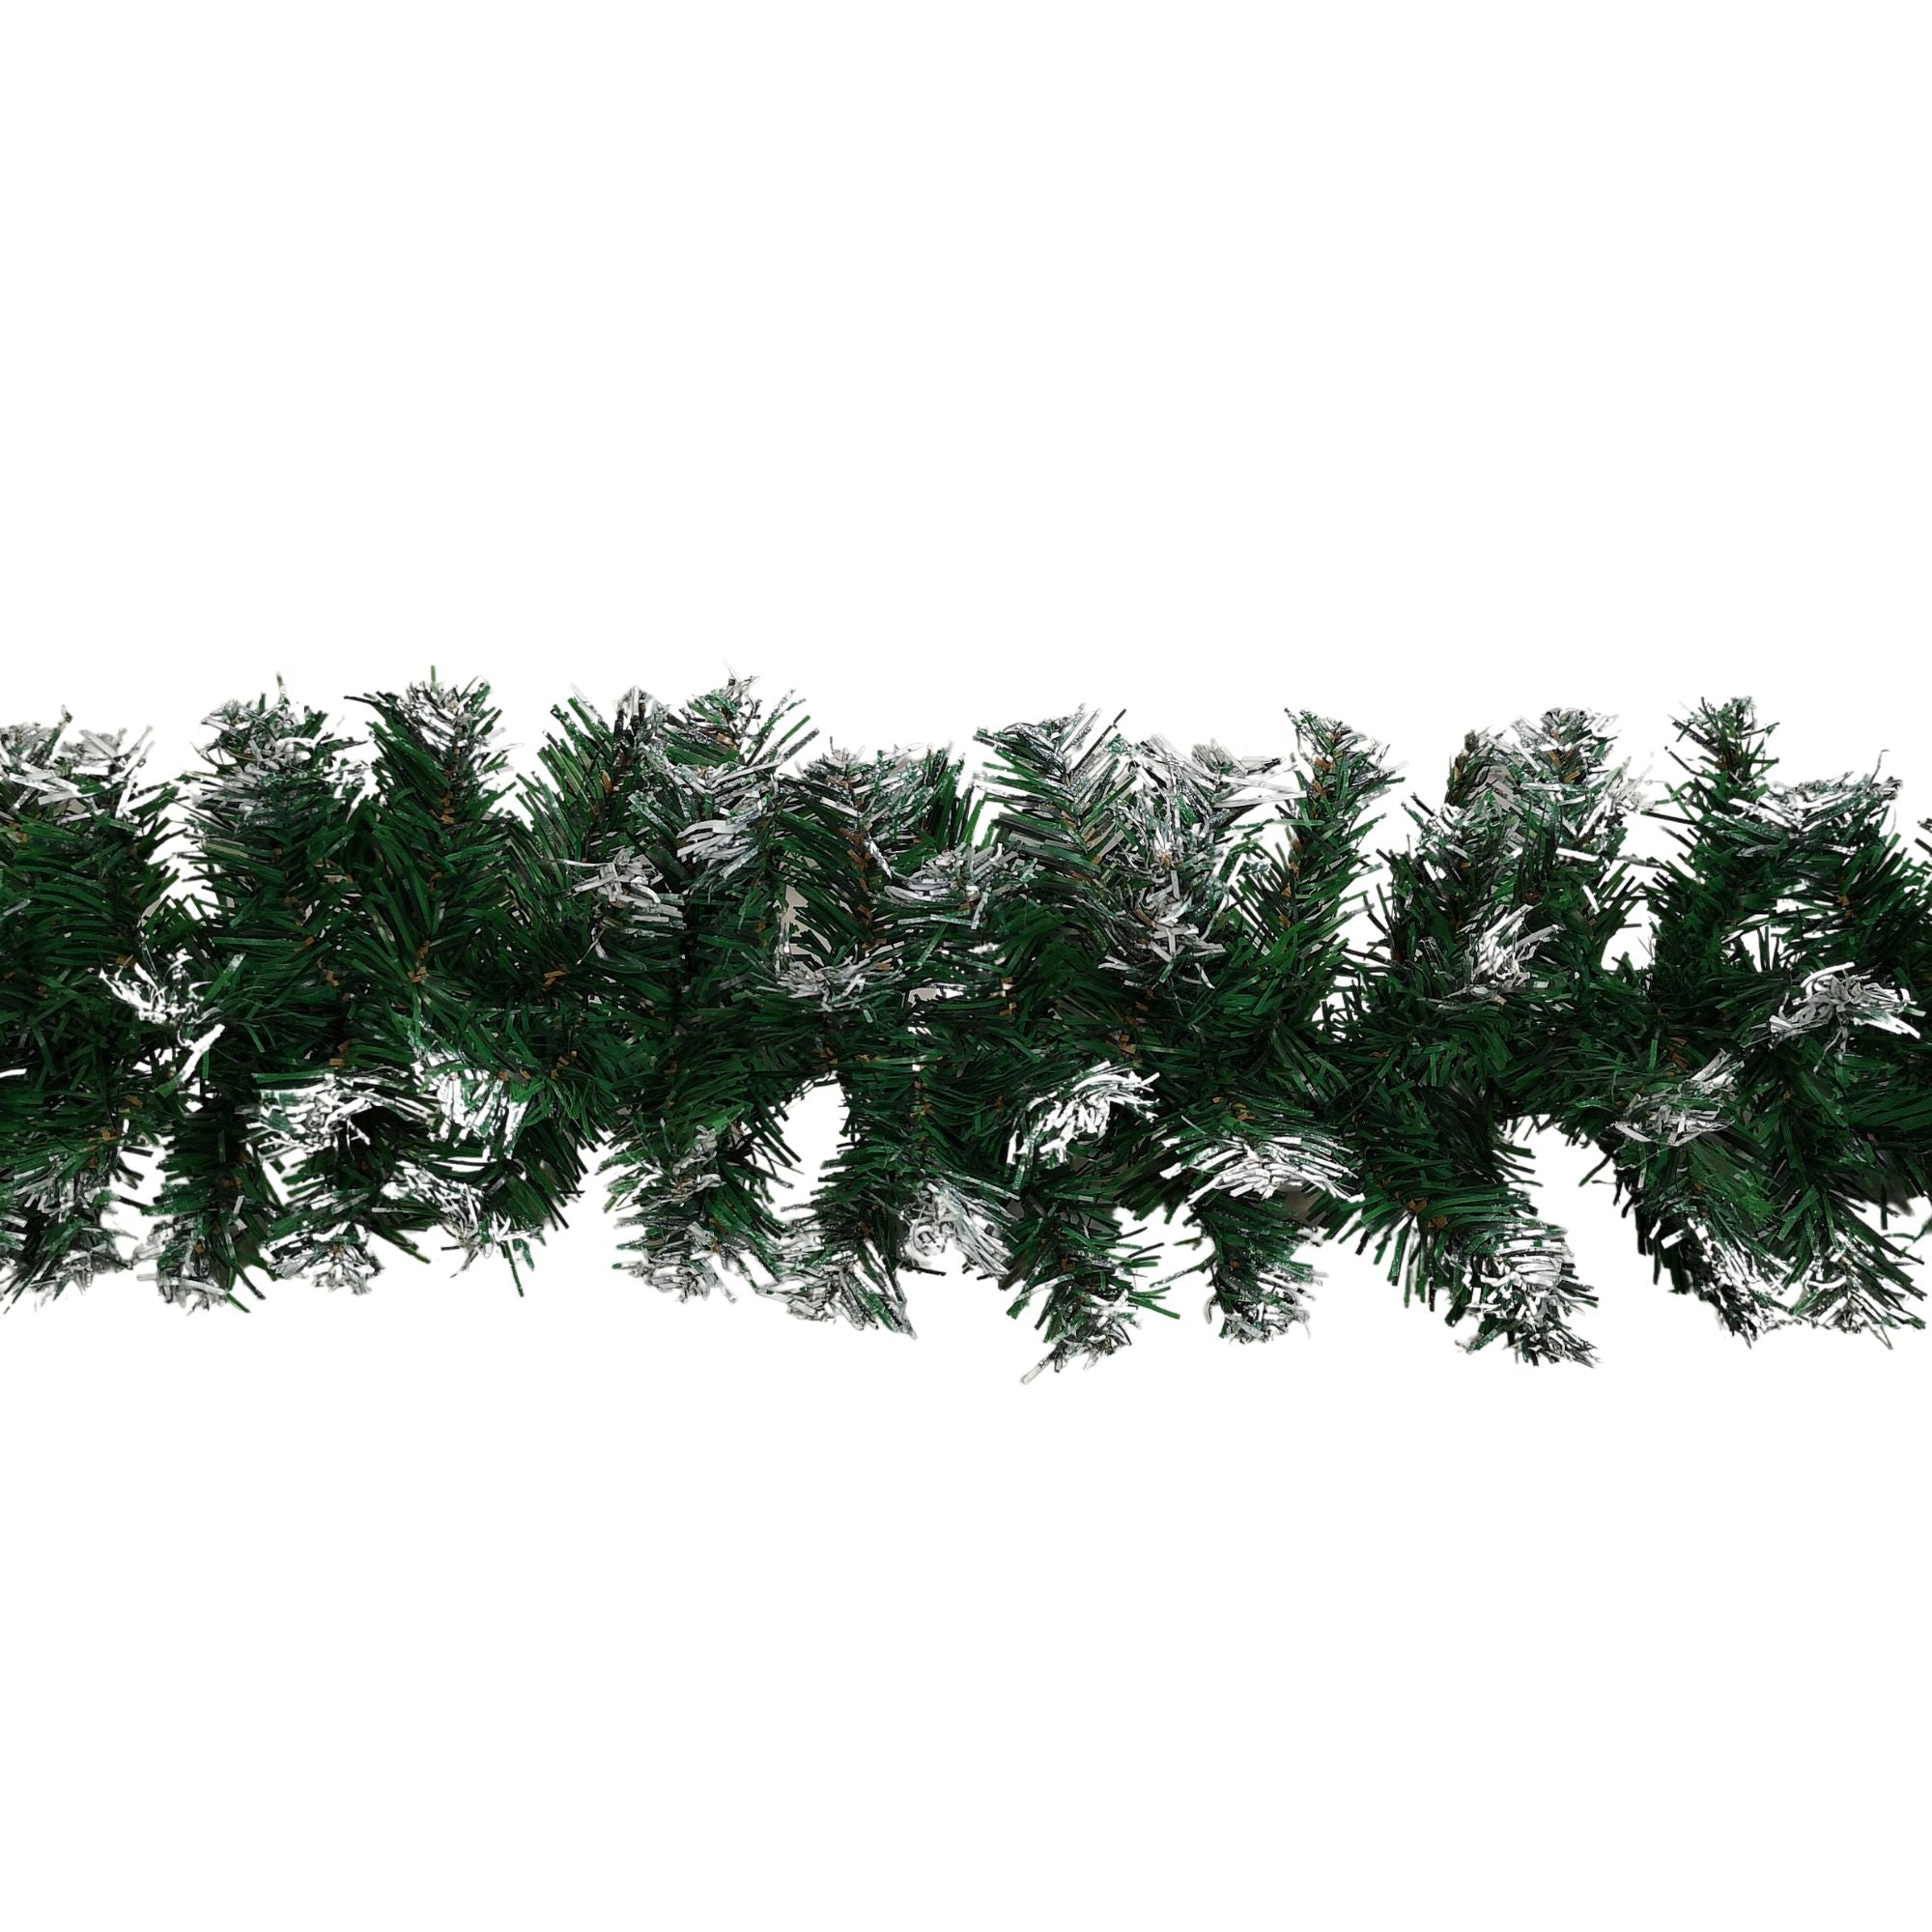 2.7m Snowy Green Christmas Garland with 260 Snow Tipped Christmas Garland Decoration Xmas garlands Decoration for Stairs, Fireplaces, Home Decor New Year Wedding Holiday